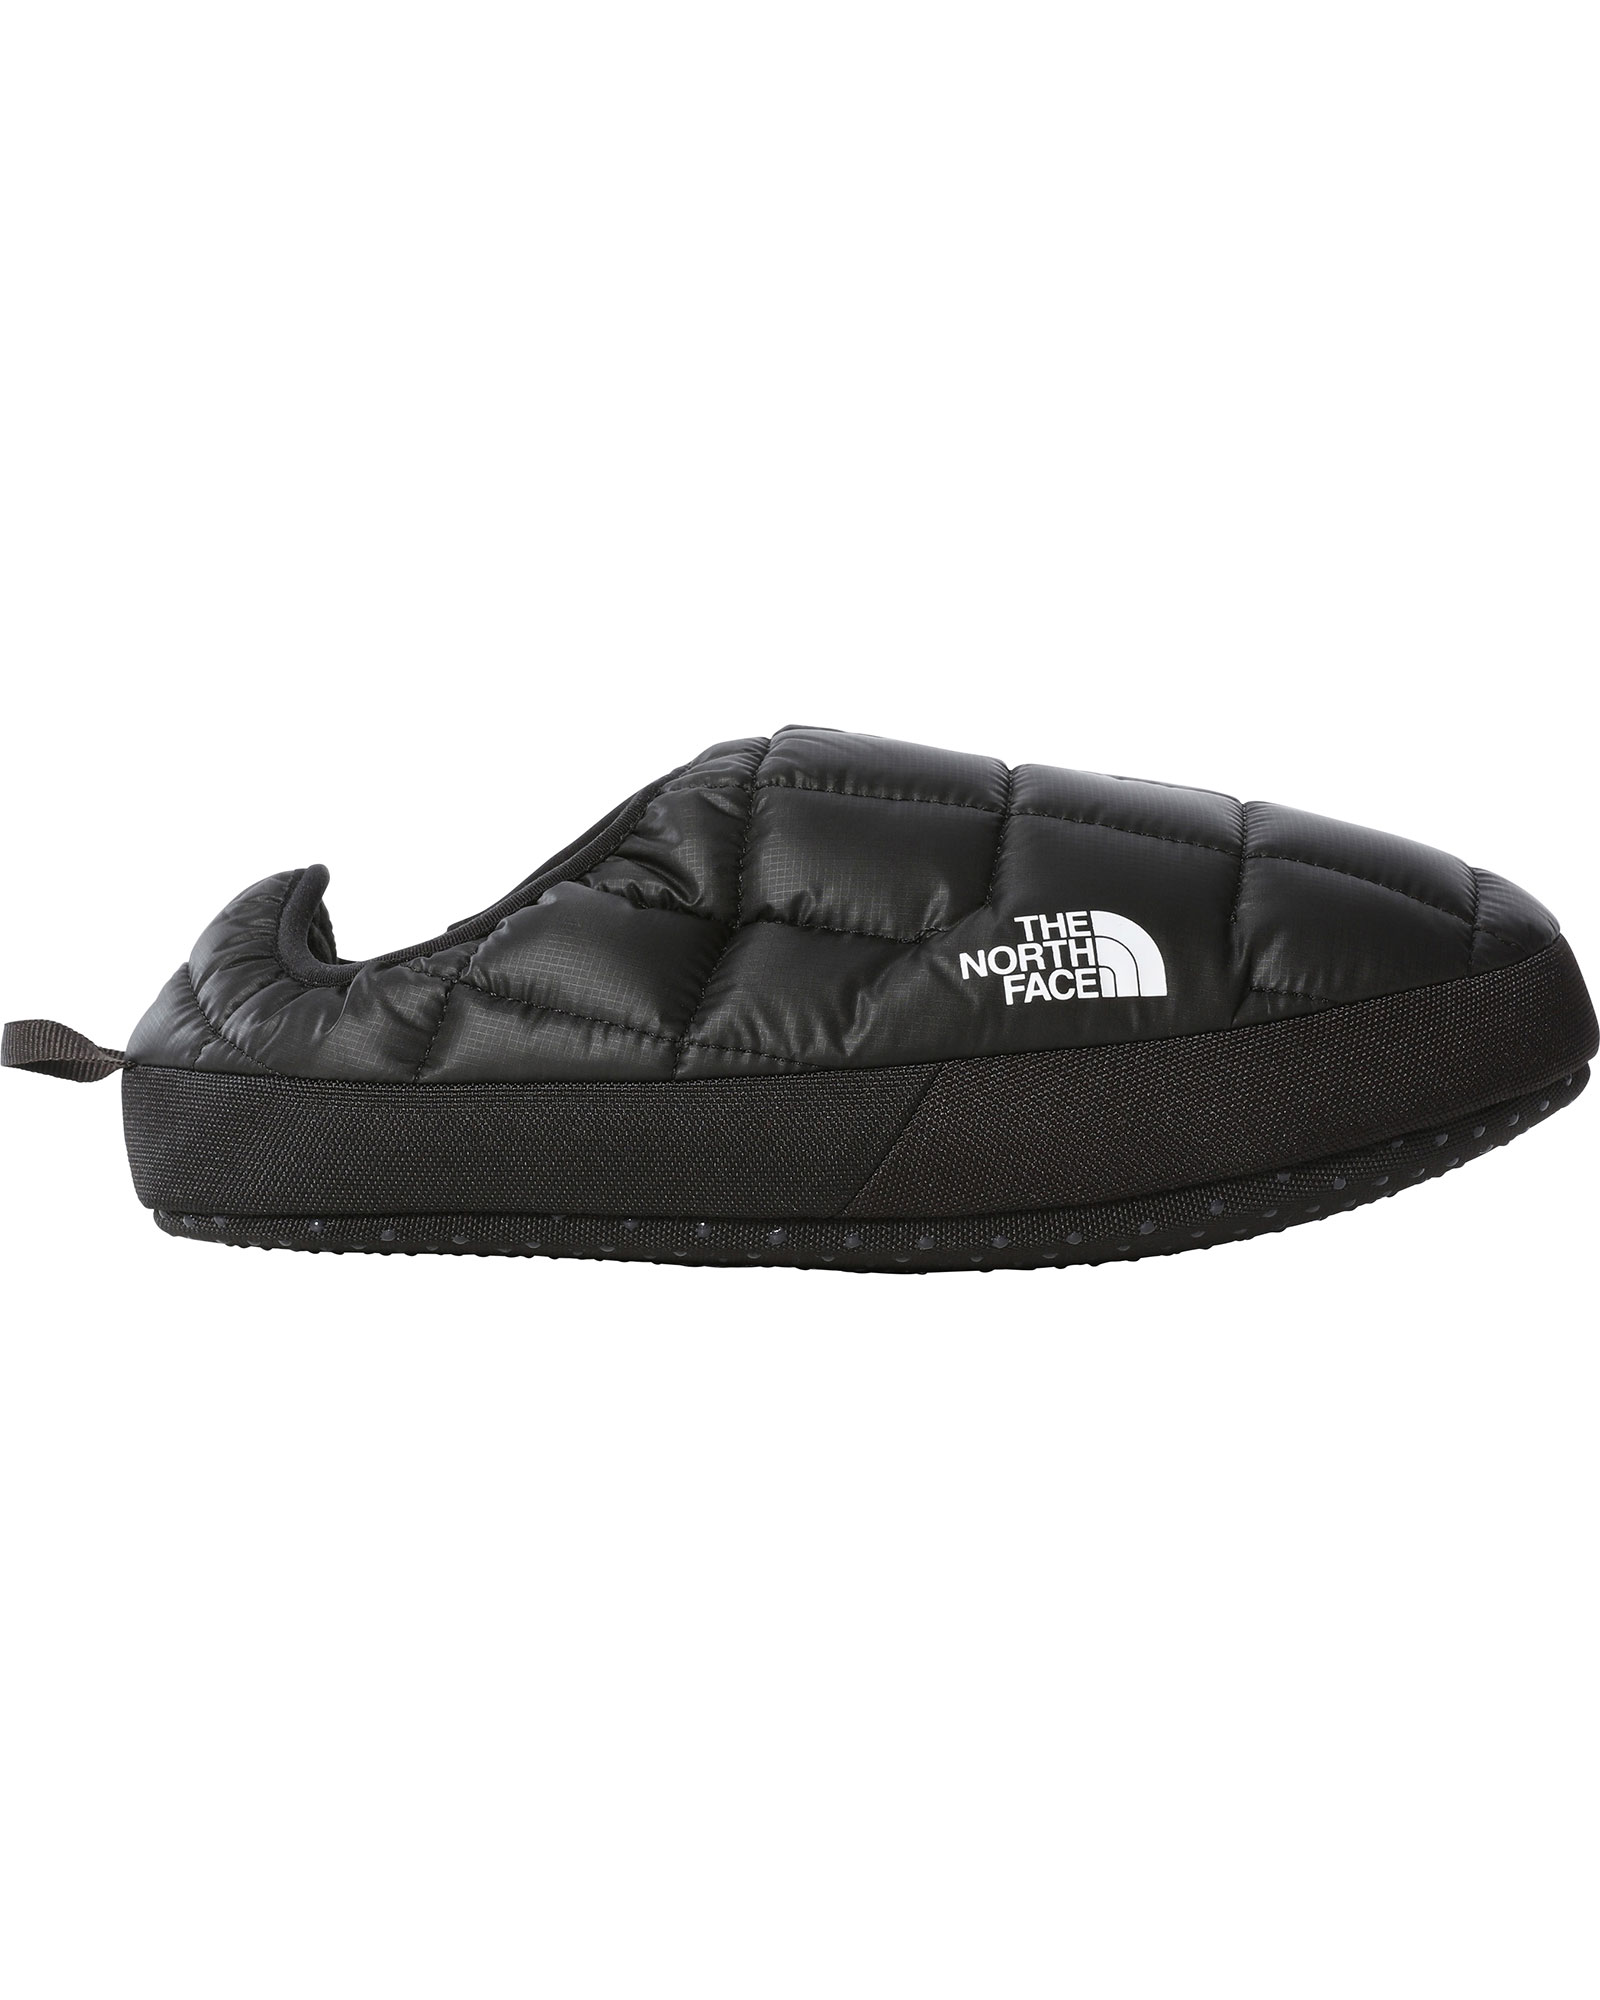 The North Face Women’s ThermoBall V Mules - TNF Black/TNF Black S